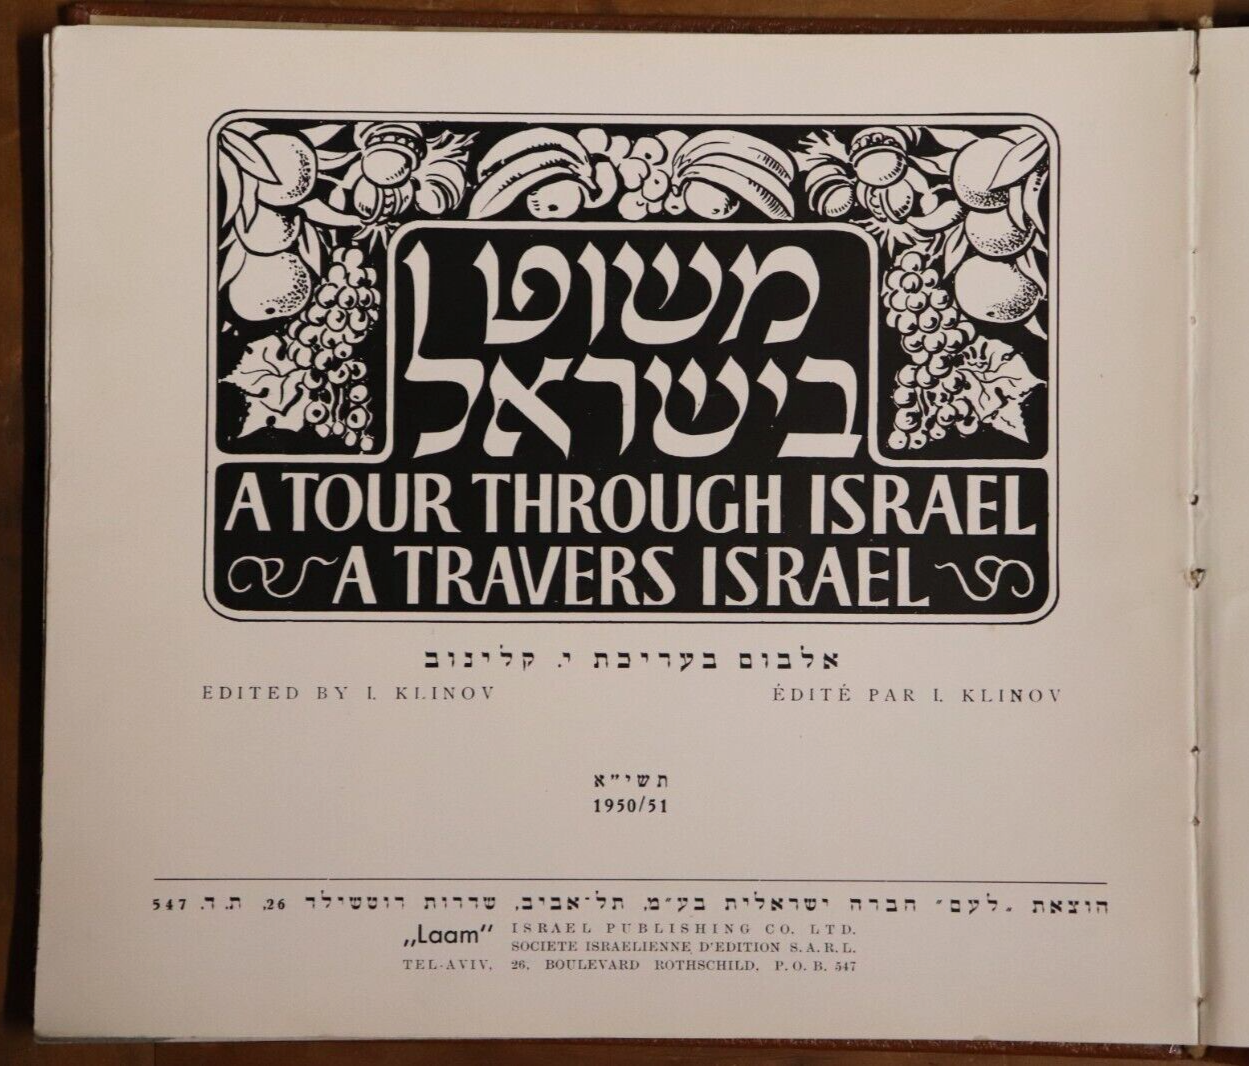 A Tour Through Israel: A Travers Israel - 1951 - 1st Edition History Book - 0